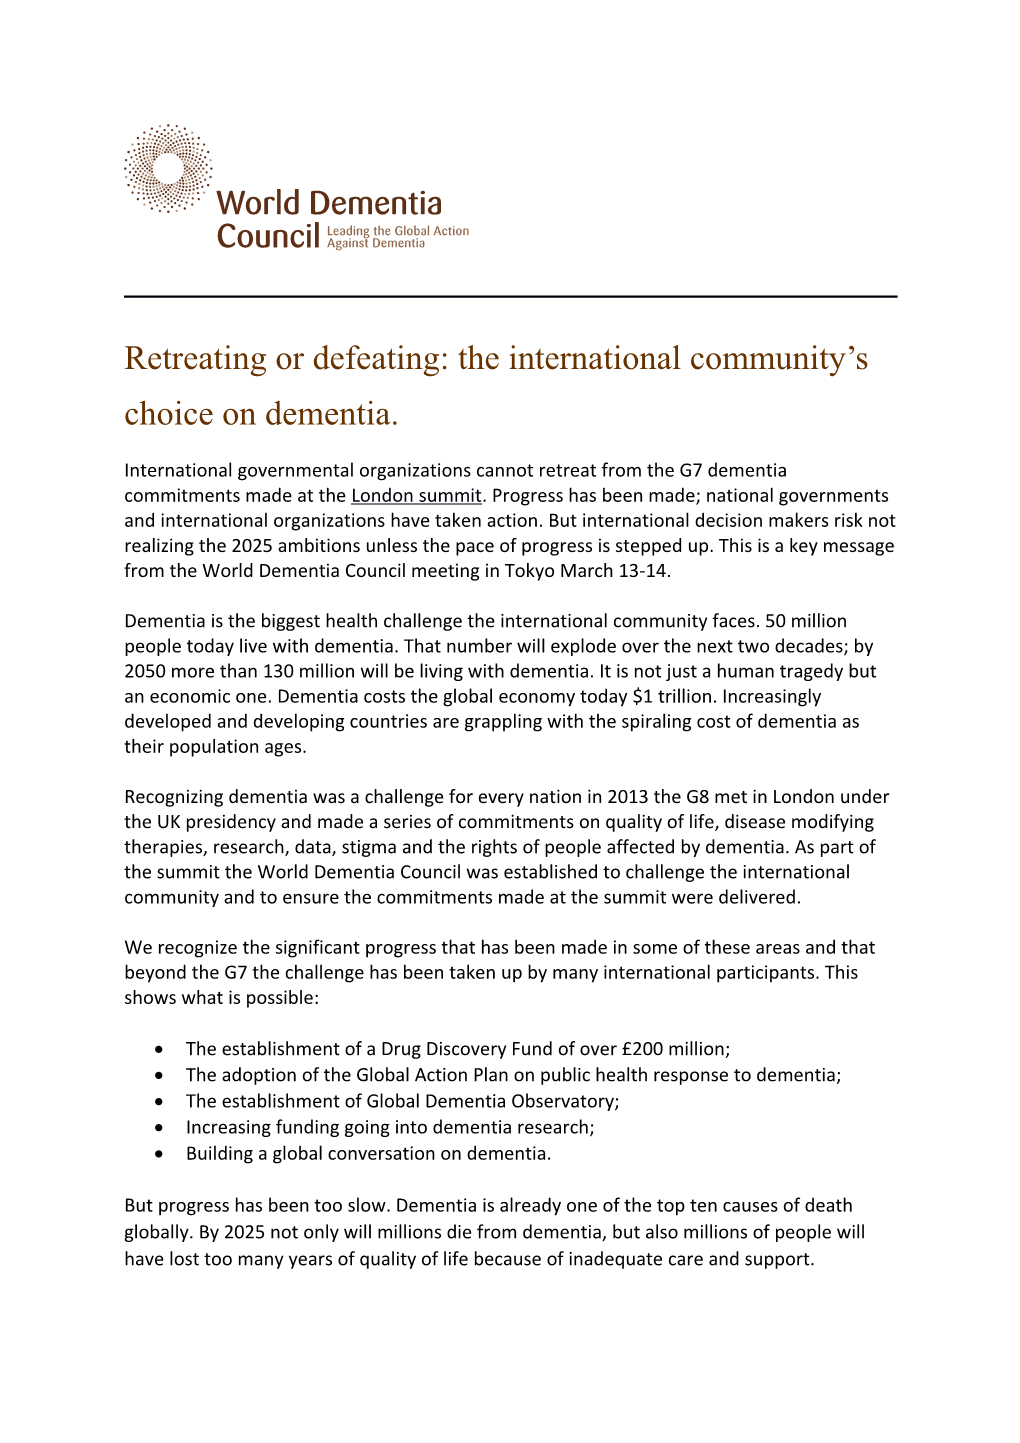 Retreating Or Defeating: the Internationalcommunity S Choice on Dementia